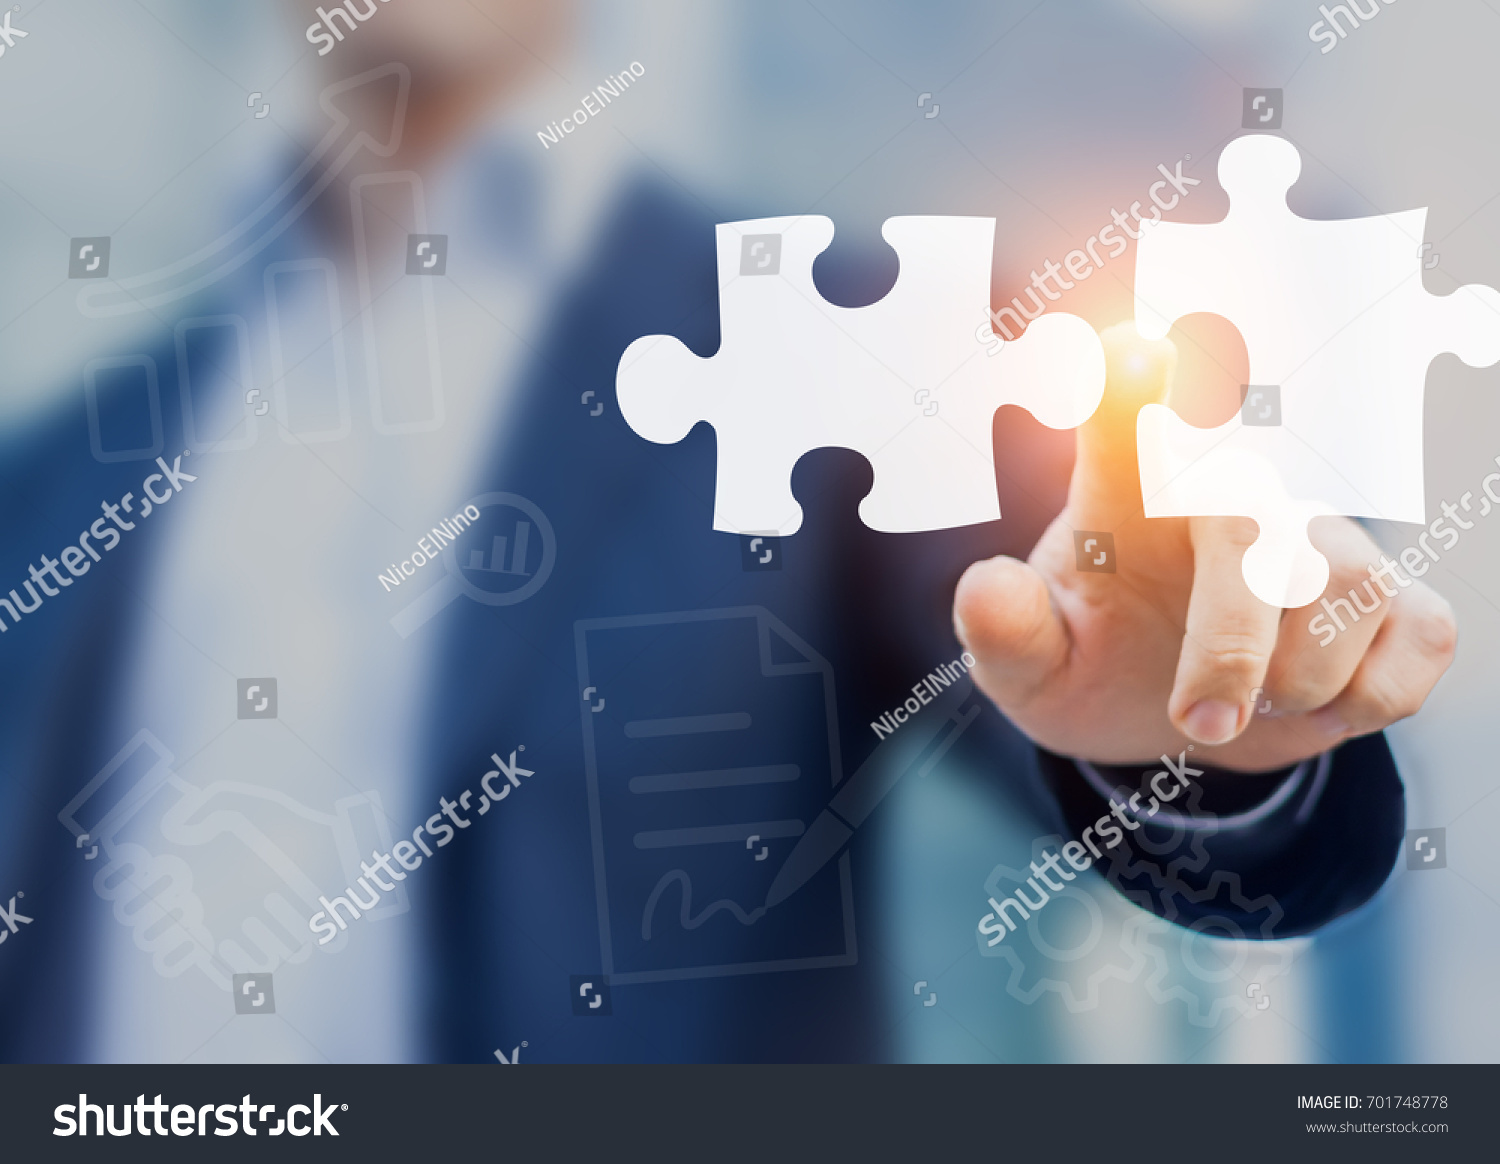 Mergers and acquisition concept with consultant touching icons of puzzle pieces representing the merging of two companies or joint venture, partnership #701748778